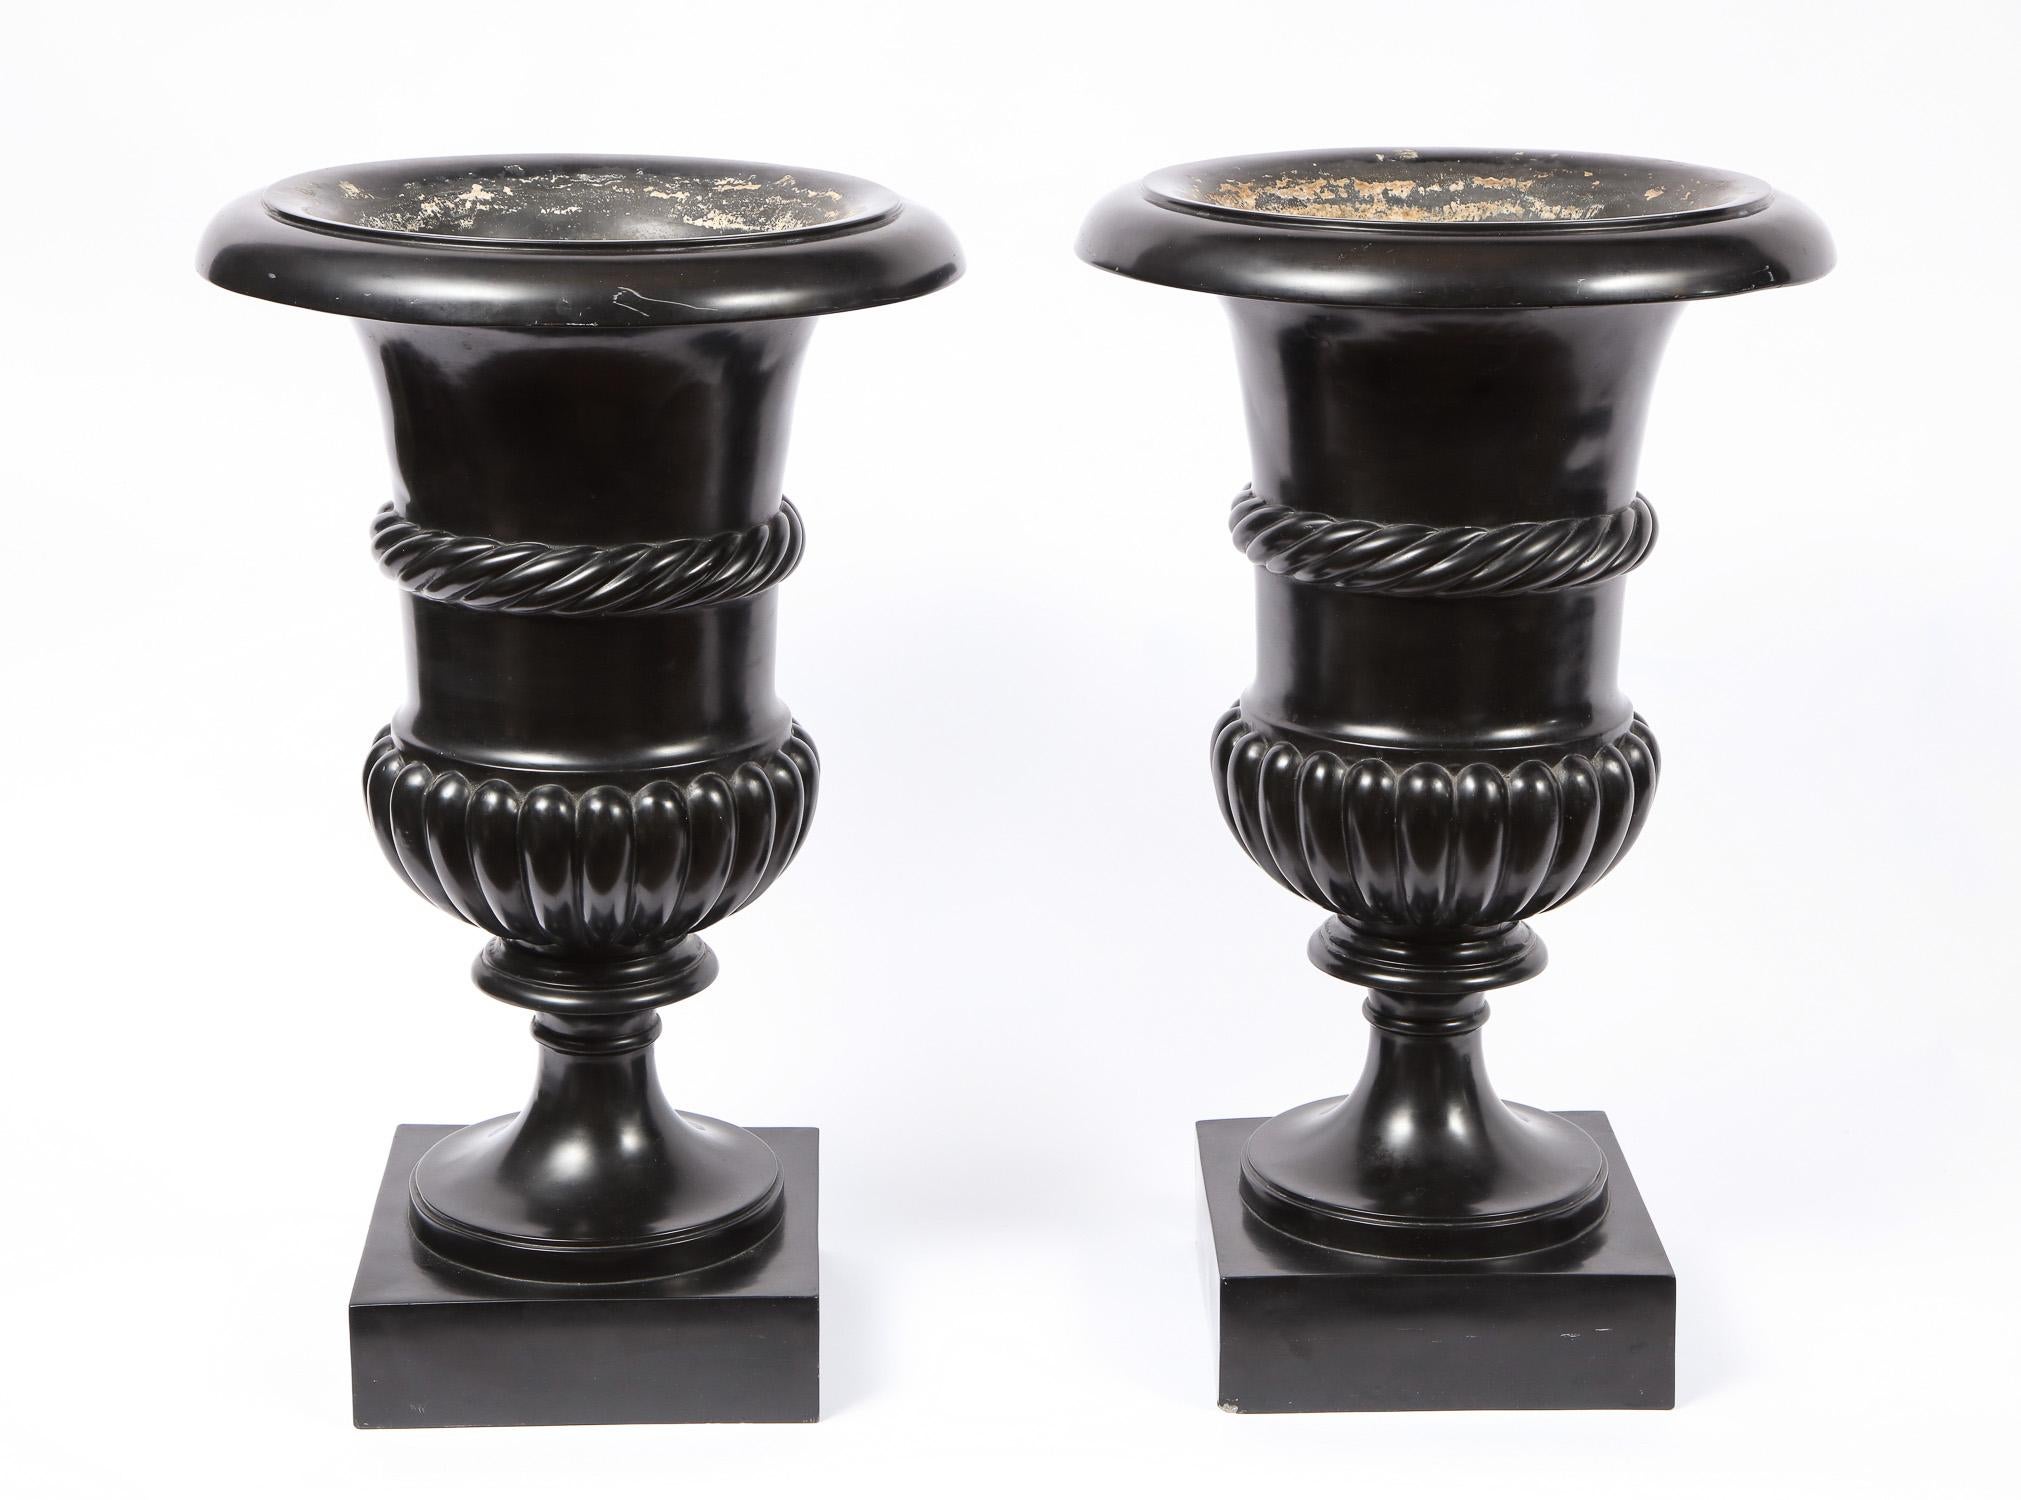 A fine pair of large antique 19th century Roman neoclassical Campagna shaped black Scagliola vases or urns. Seated on a square base, the rim and body of each vase has a meticulously hand-fluted design. Marvelous craftsmanship has gone into each of